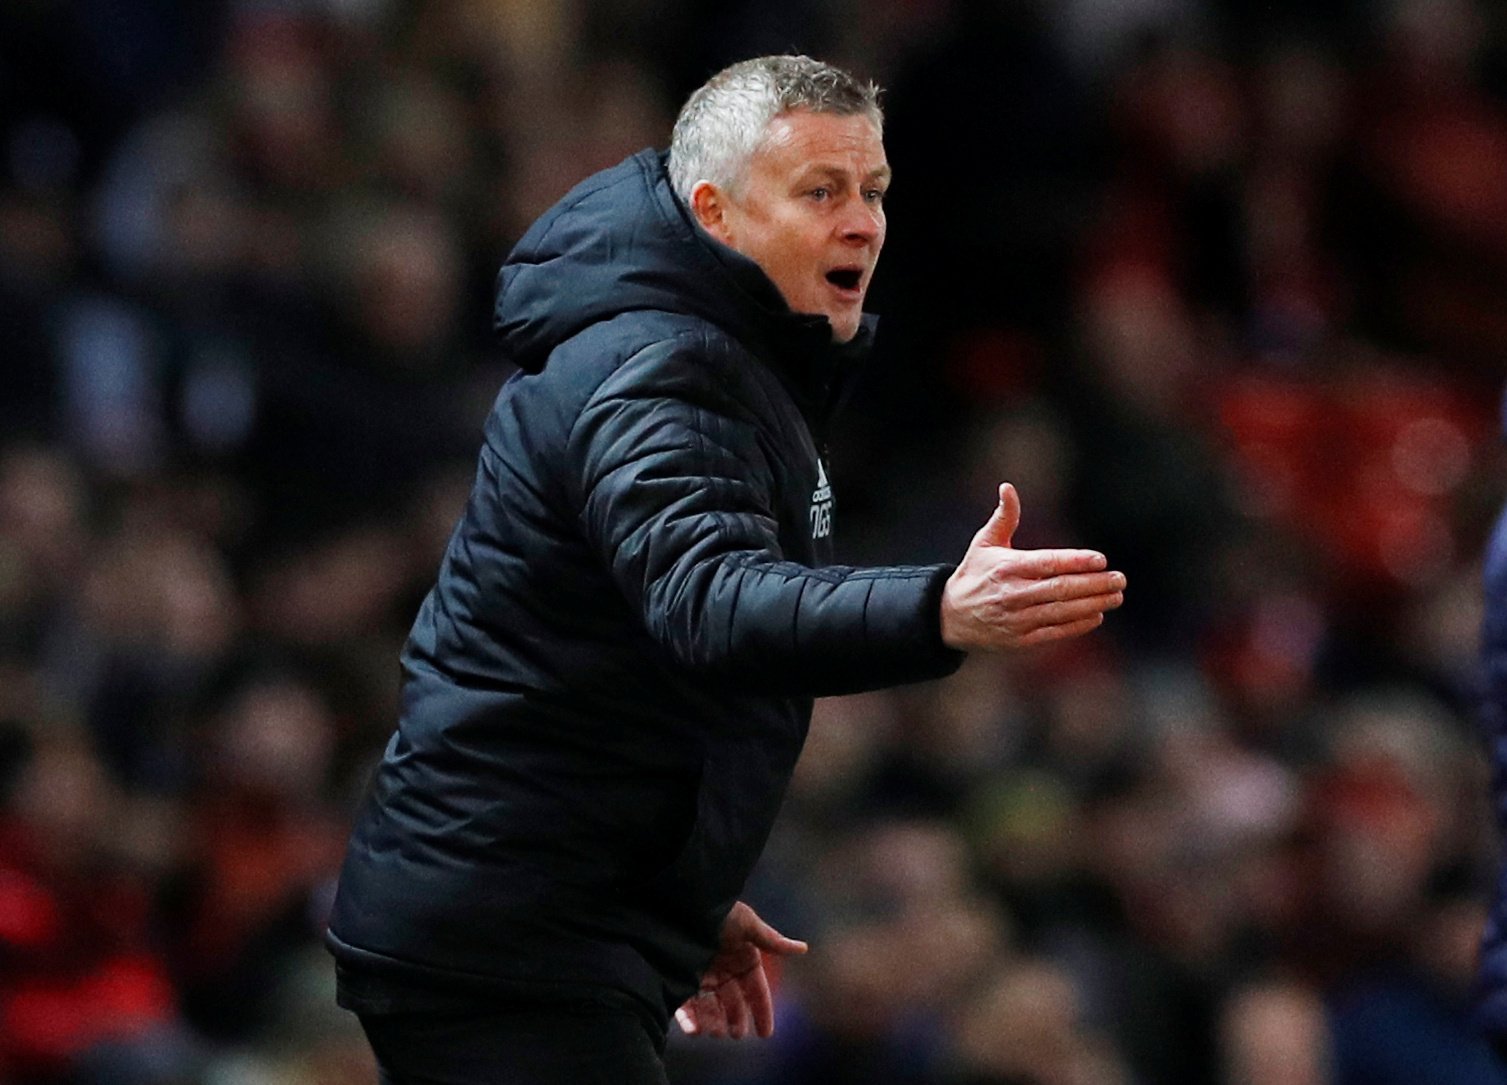 Ole relays his fear to Manchester United players about getting sacked